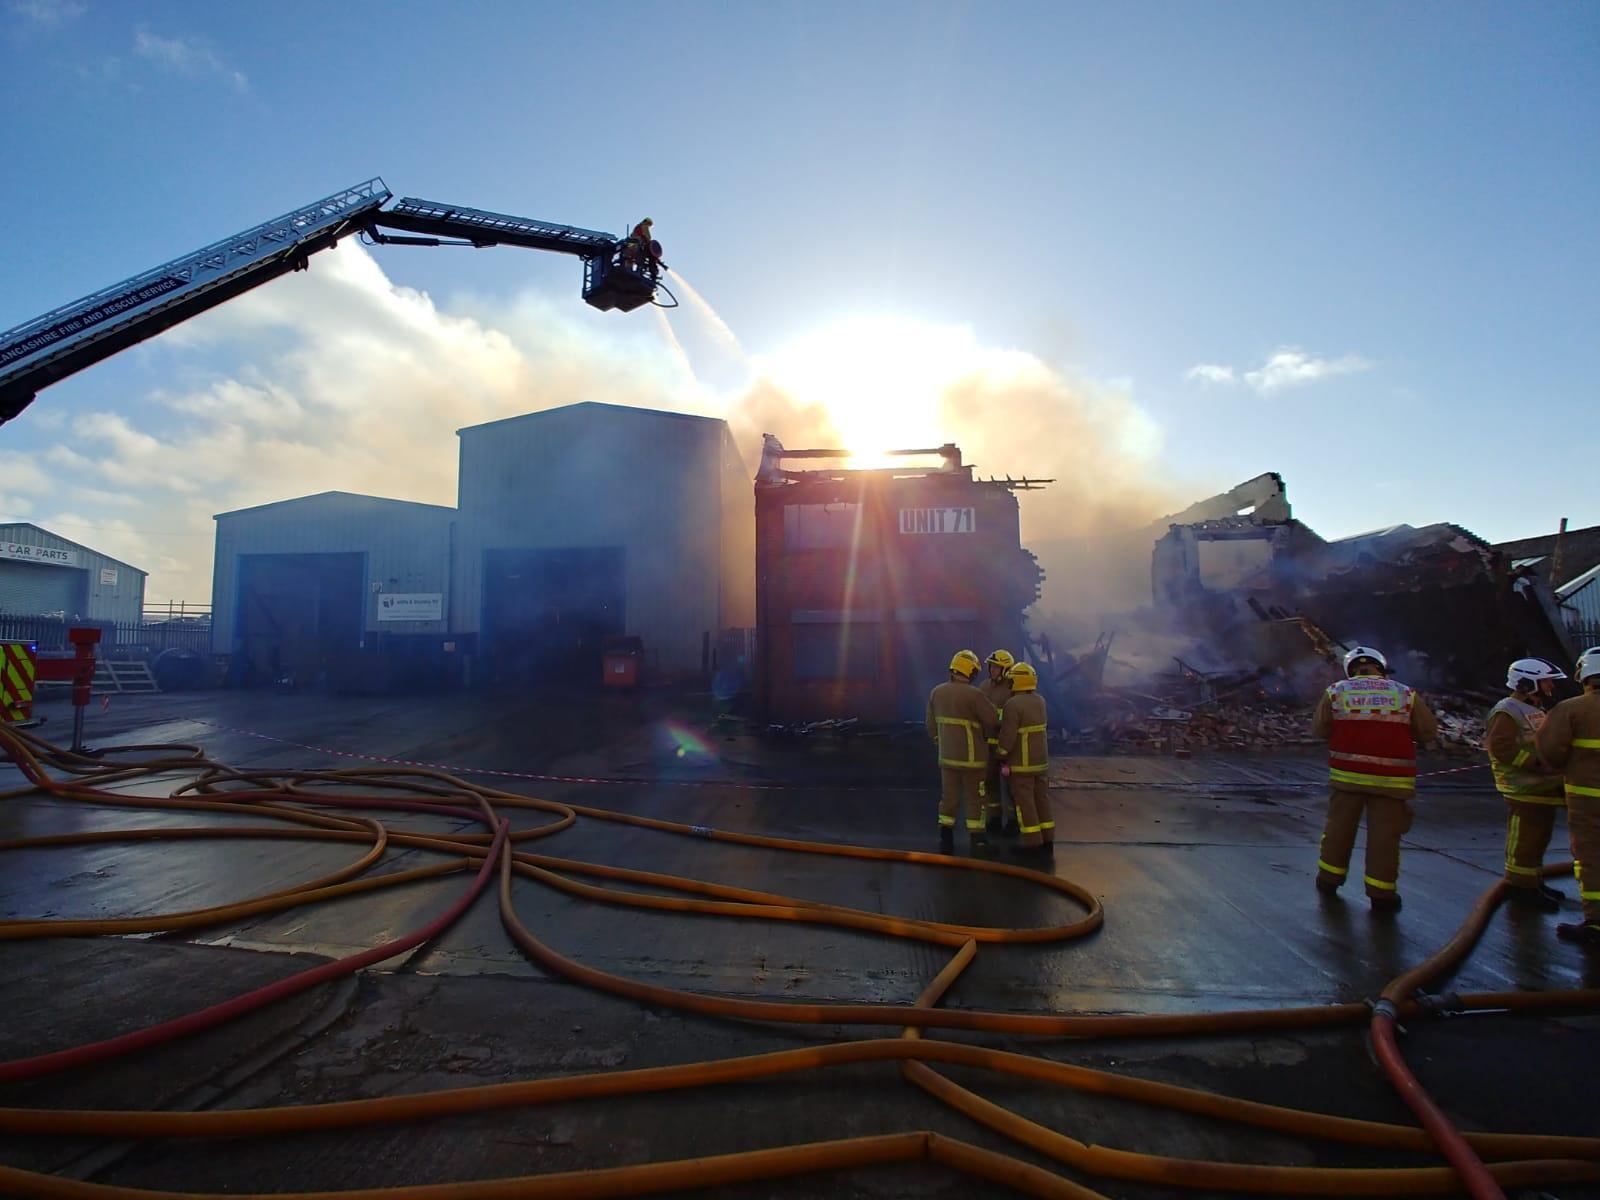 The fire began at around 6.45am this morning (Monday, March 2) at a business unit in Cowley Road, off Vicarage Lane, Marton